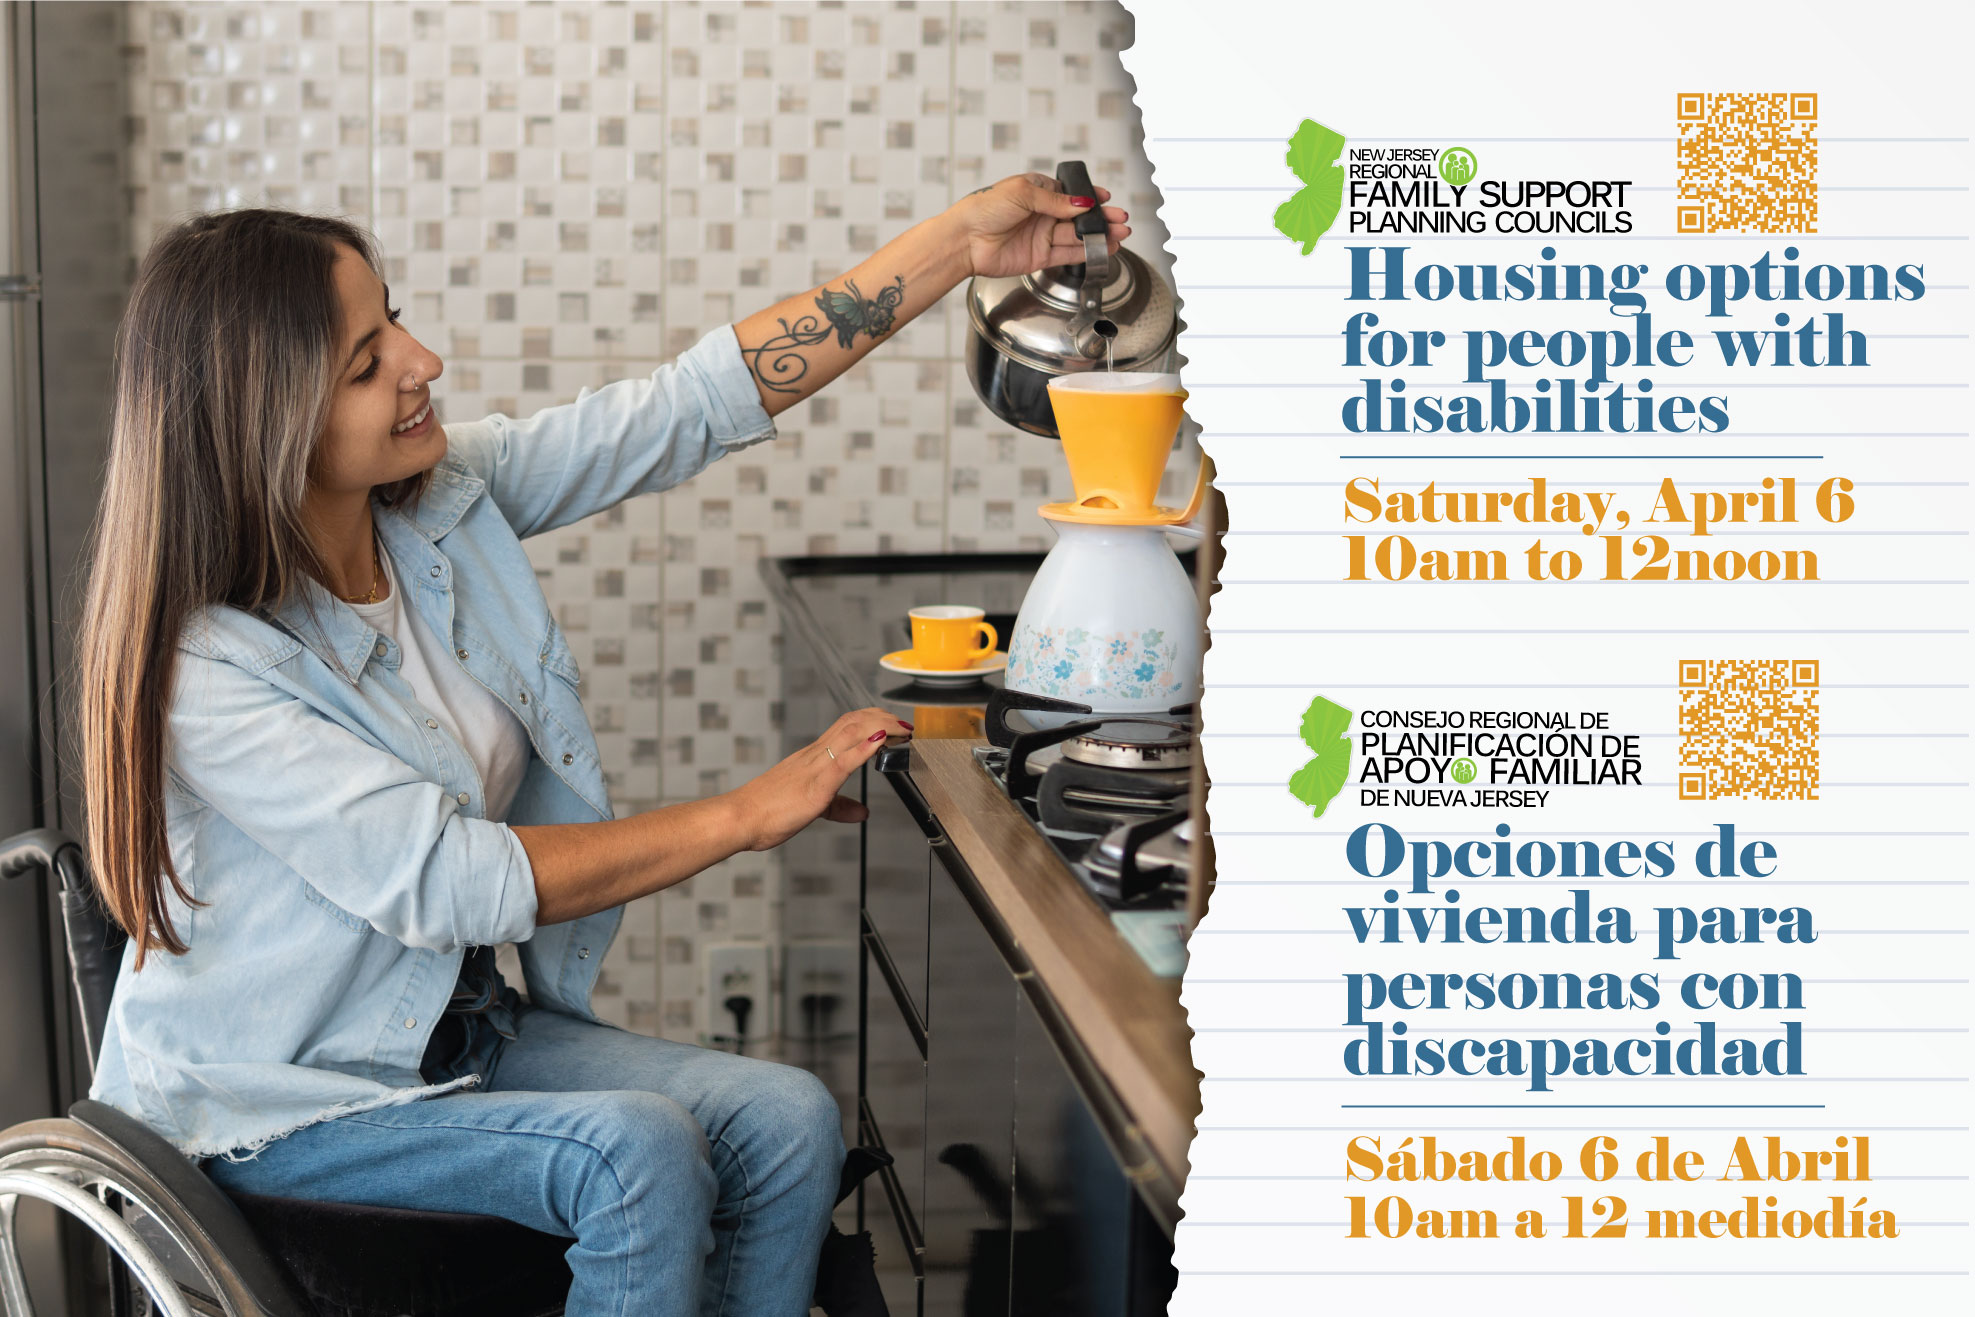 Housing options for people with disabilities Saturday, April 6 | 10am to 12noon